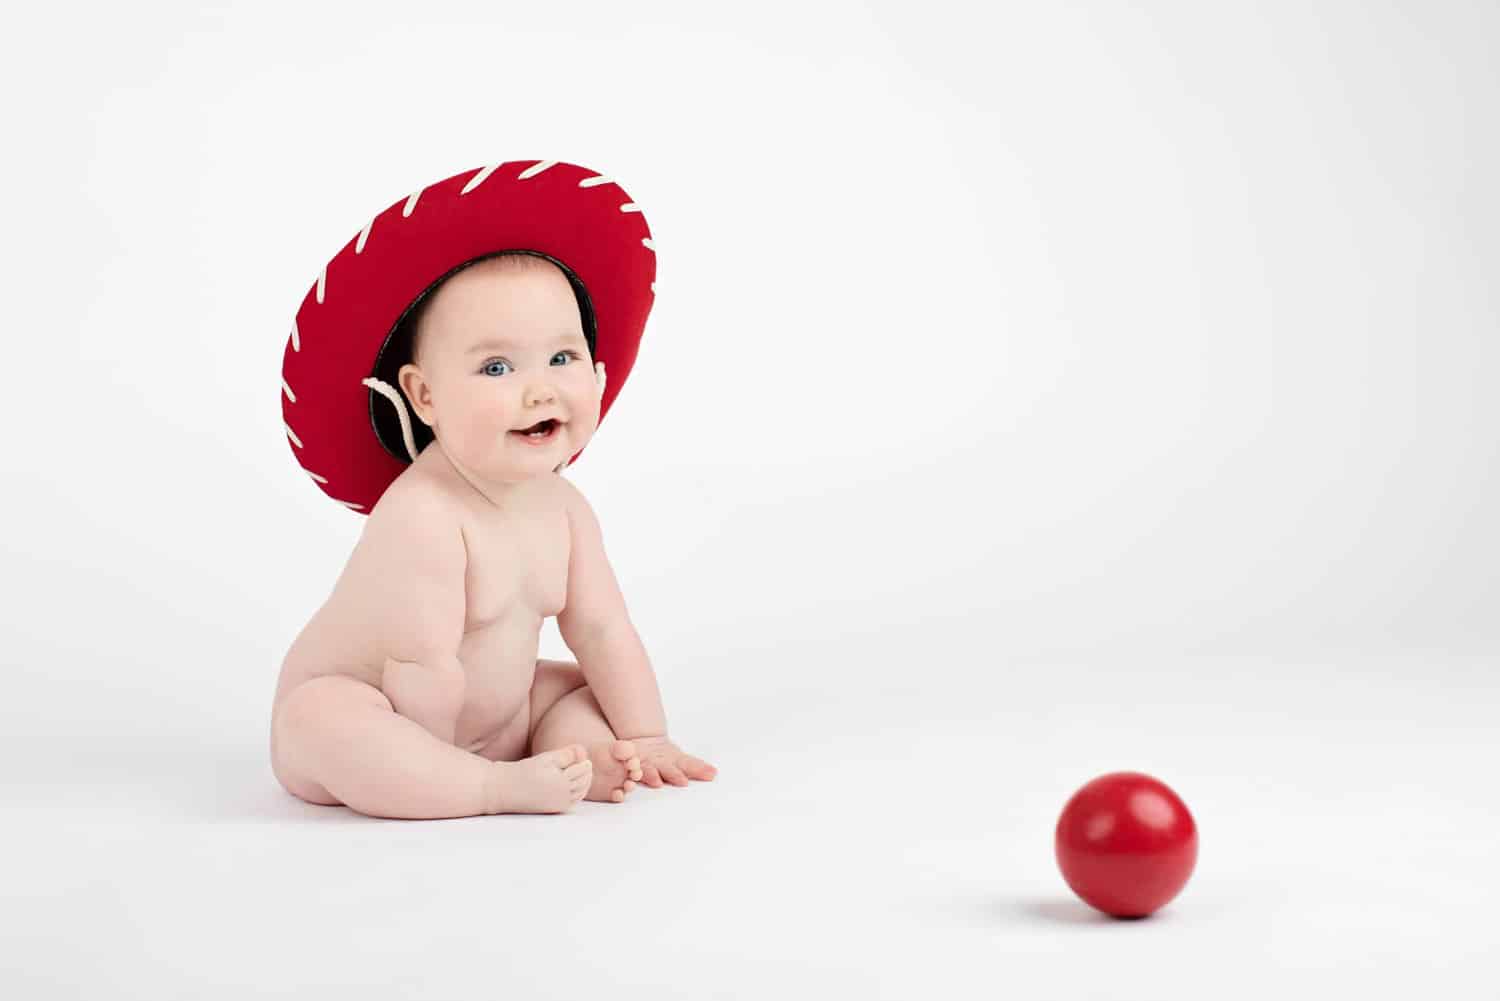 A baby in a red hat plays with a red ball.